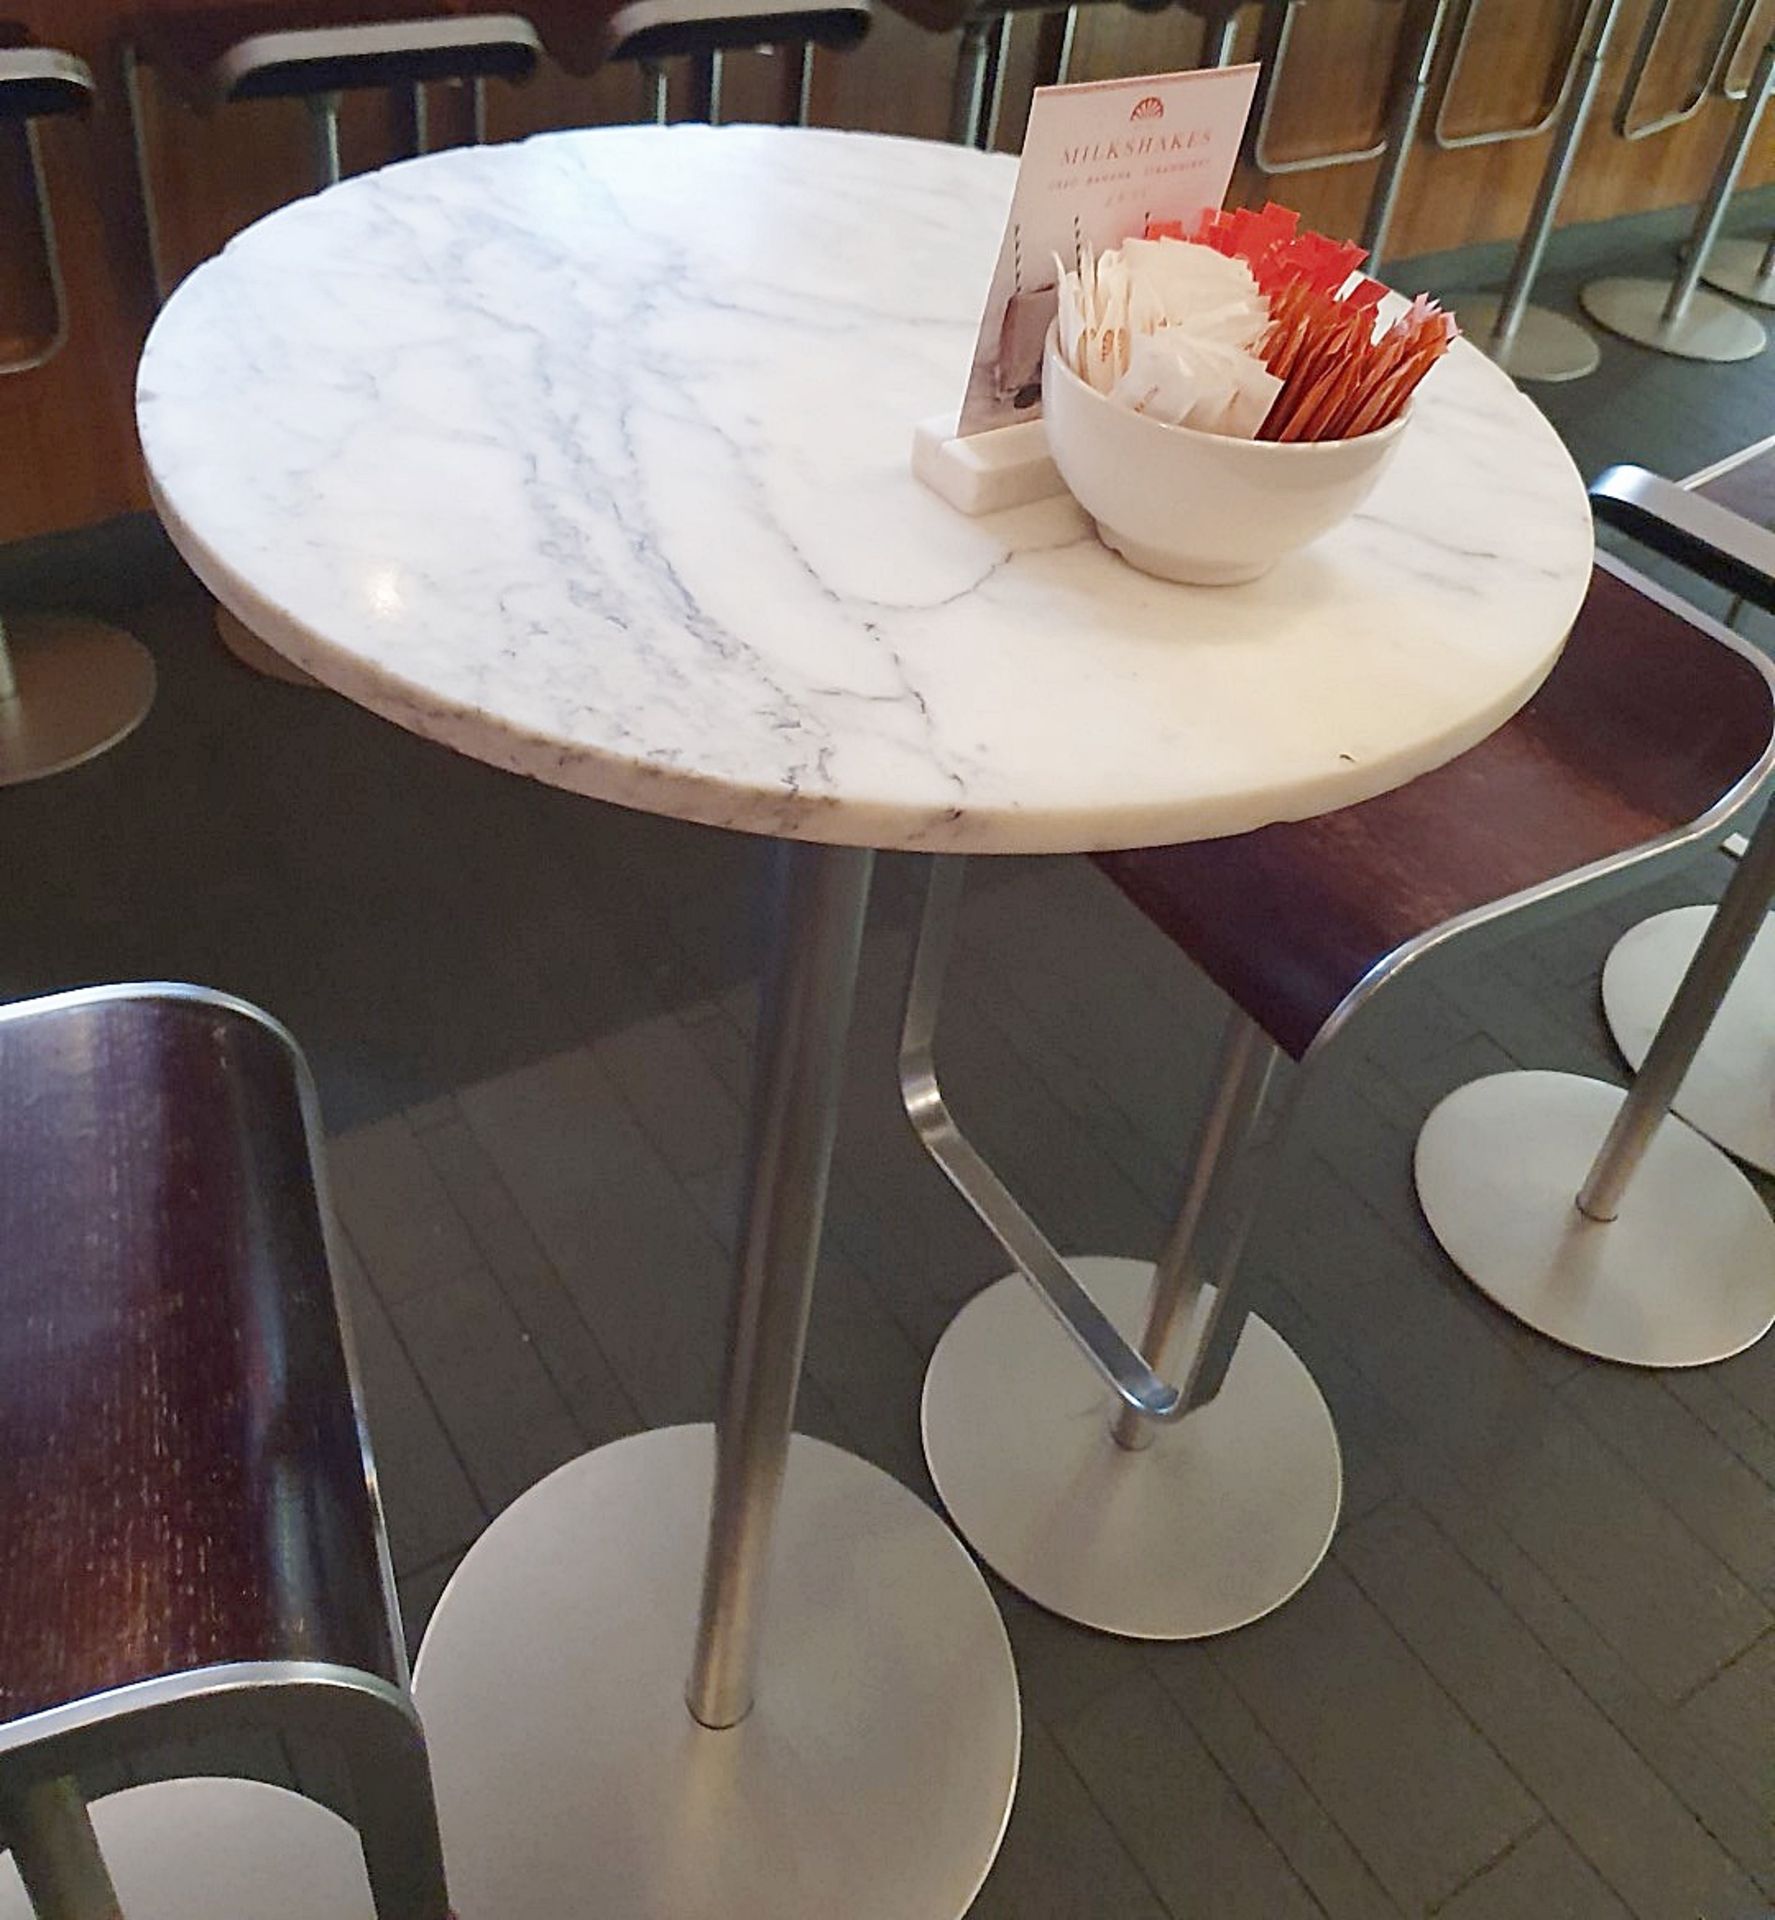 1 x Tall Round Marble/Granite Cocktail Bar Table - Dimensions: Diameter 60cm x Height 111cm - Ref: - Image 6 of 6